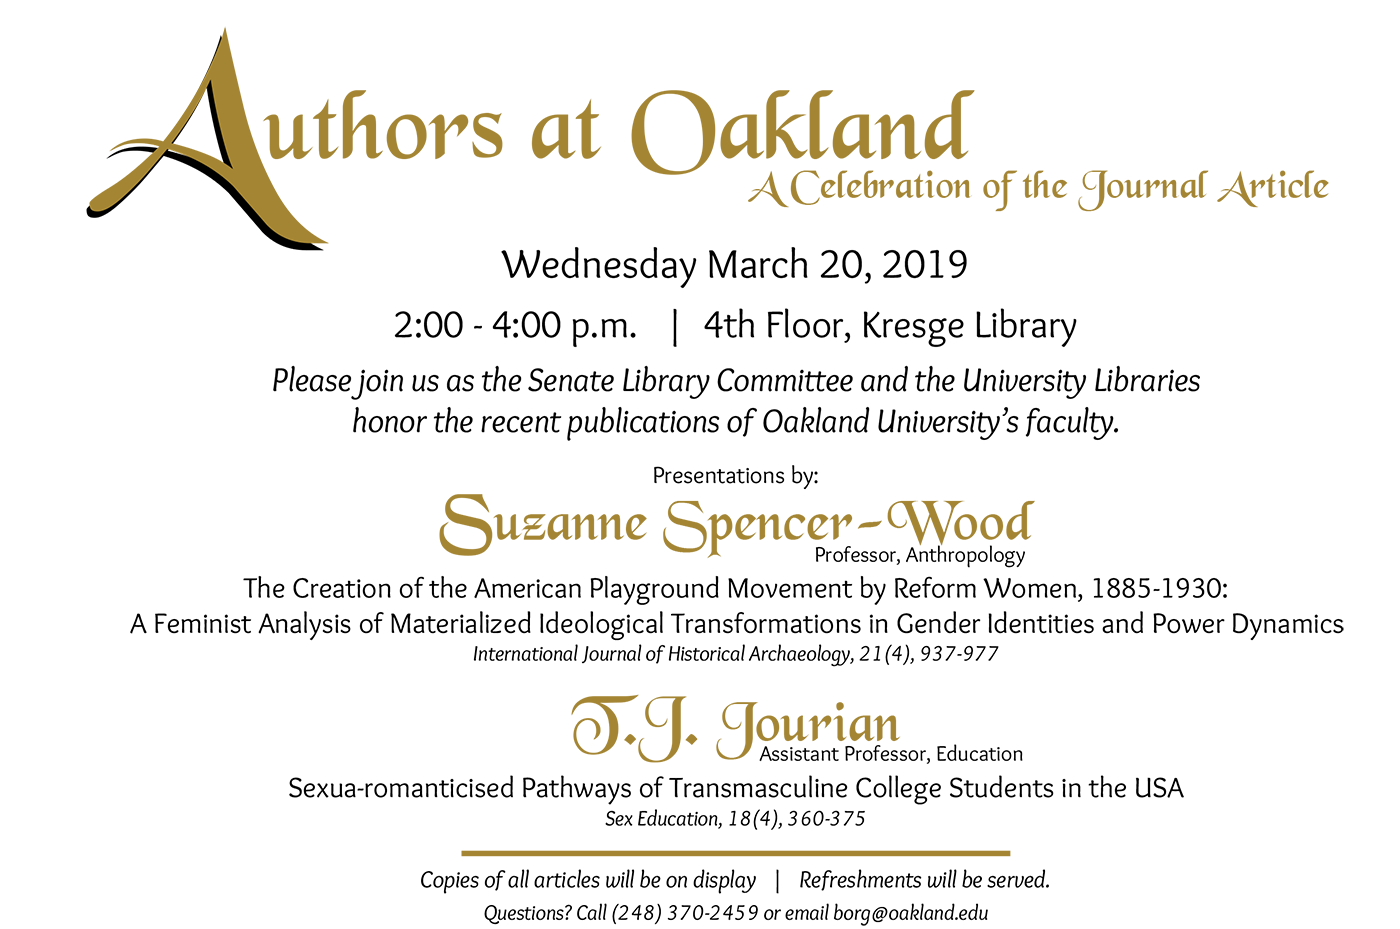 Invitation to Authors at Oakland 2019.